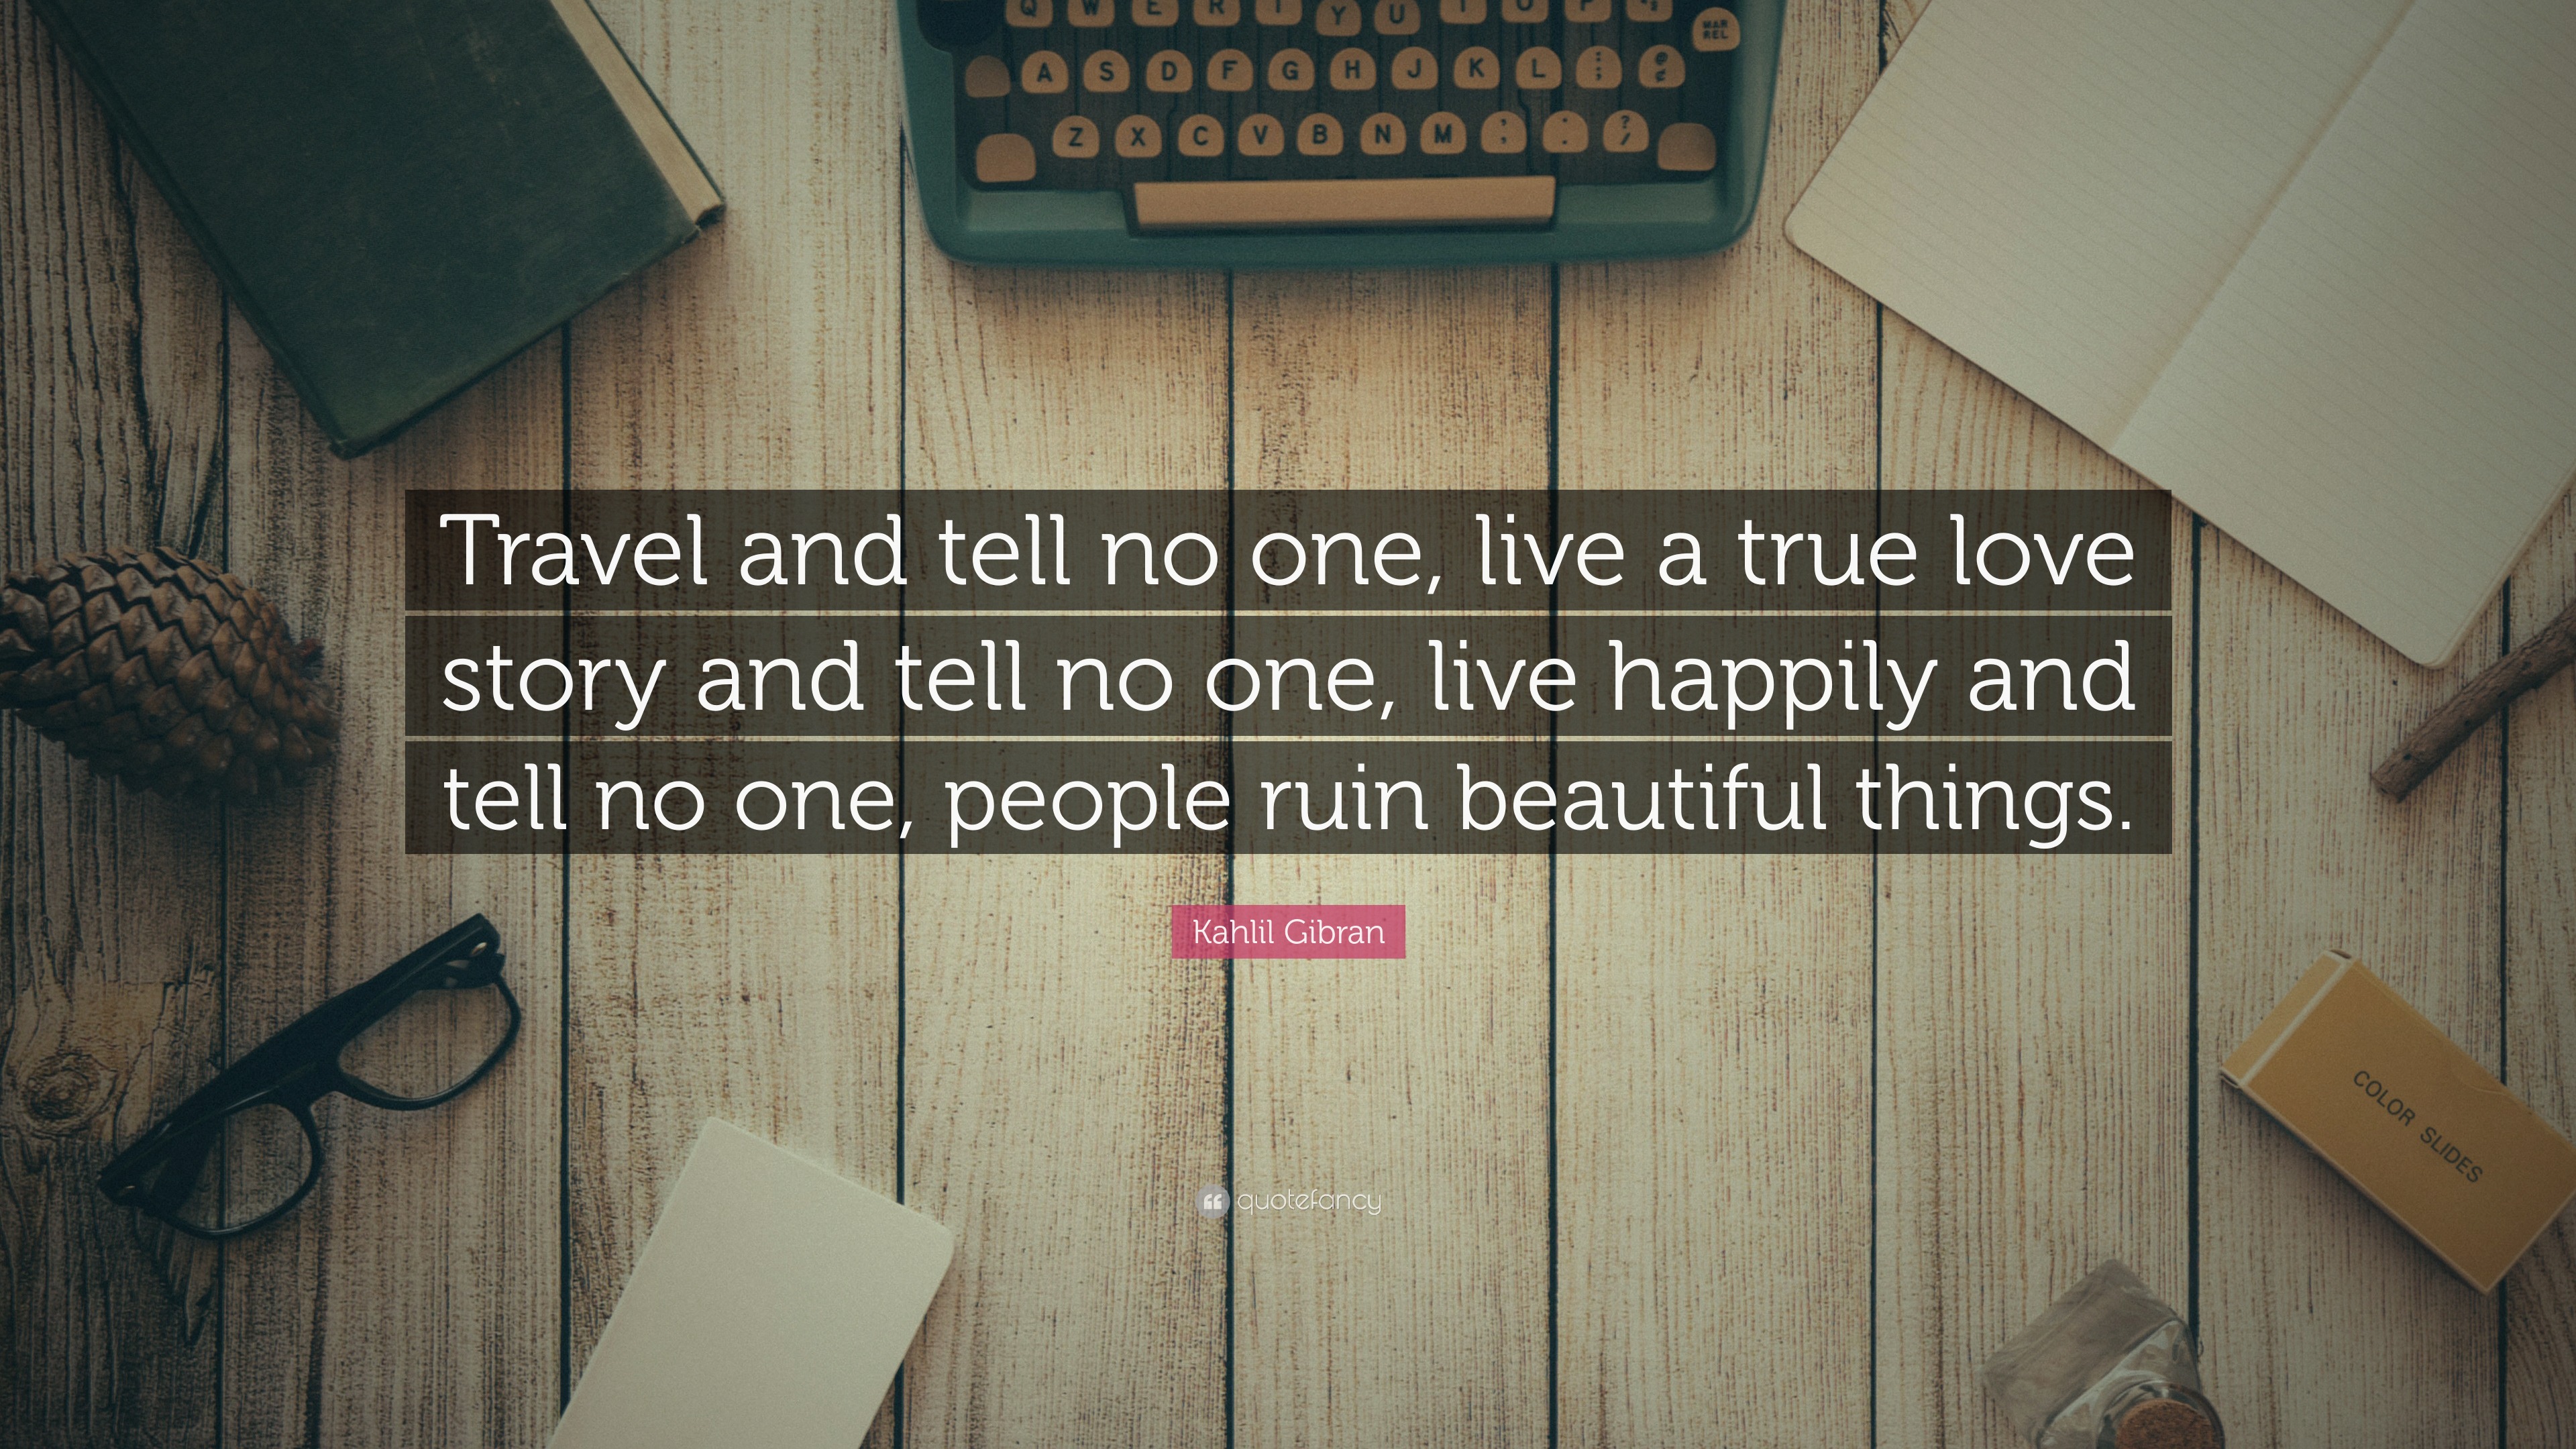 khalil gibran quotes travel and tell no one